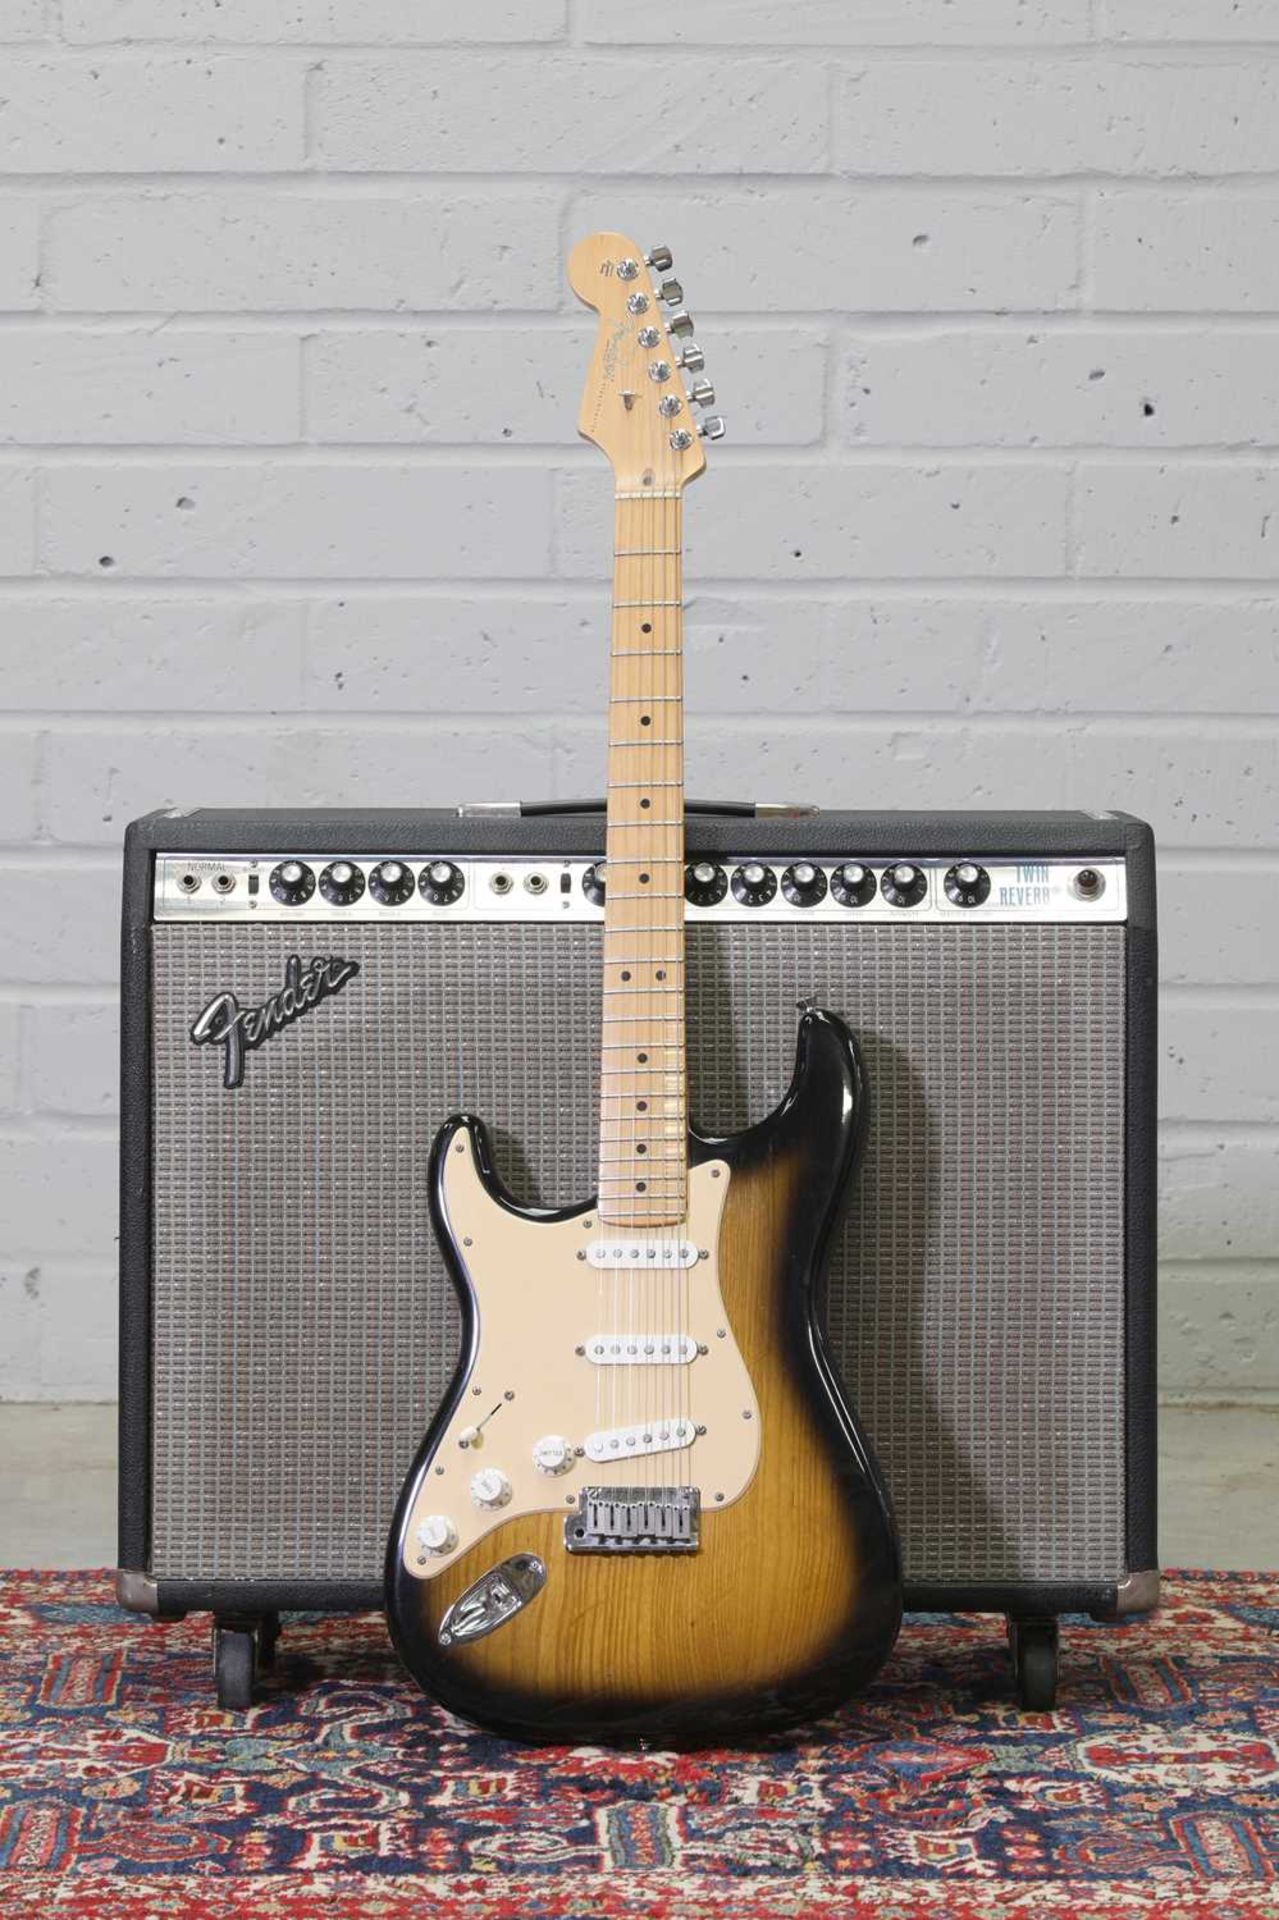 A 1994 '50th Anniversary' Fender Stratocaster electric guitar,